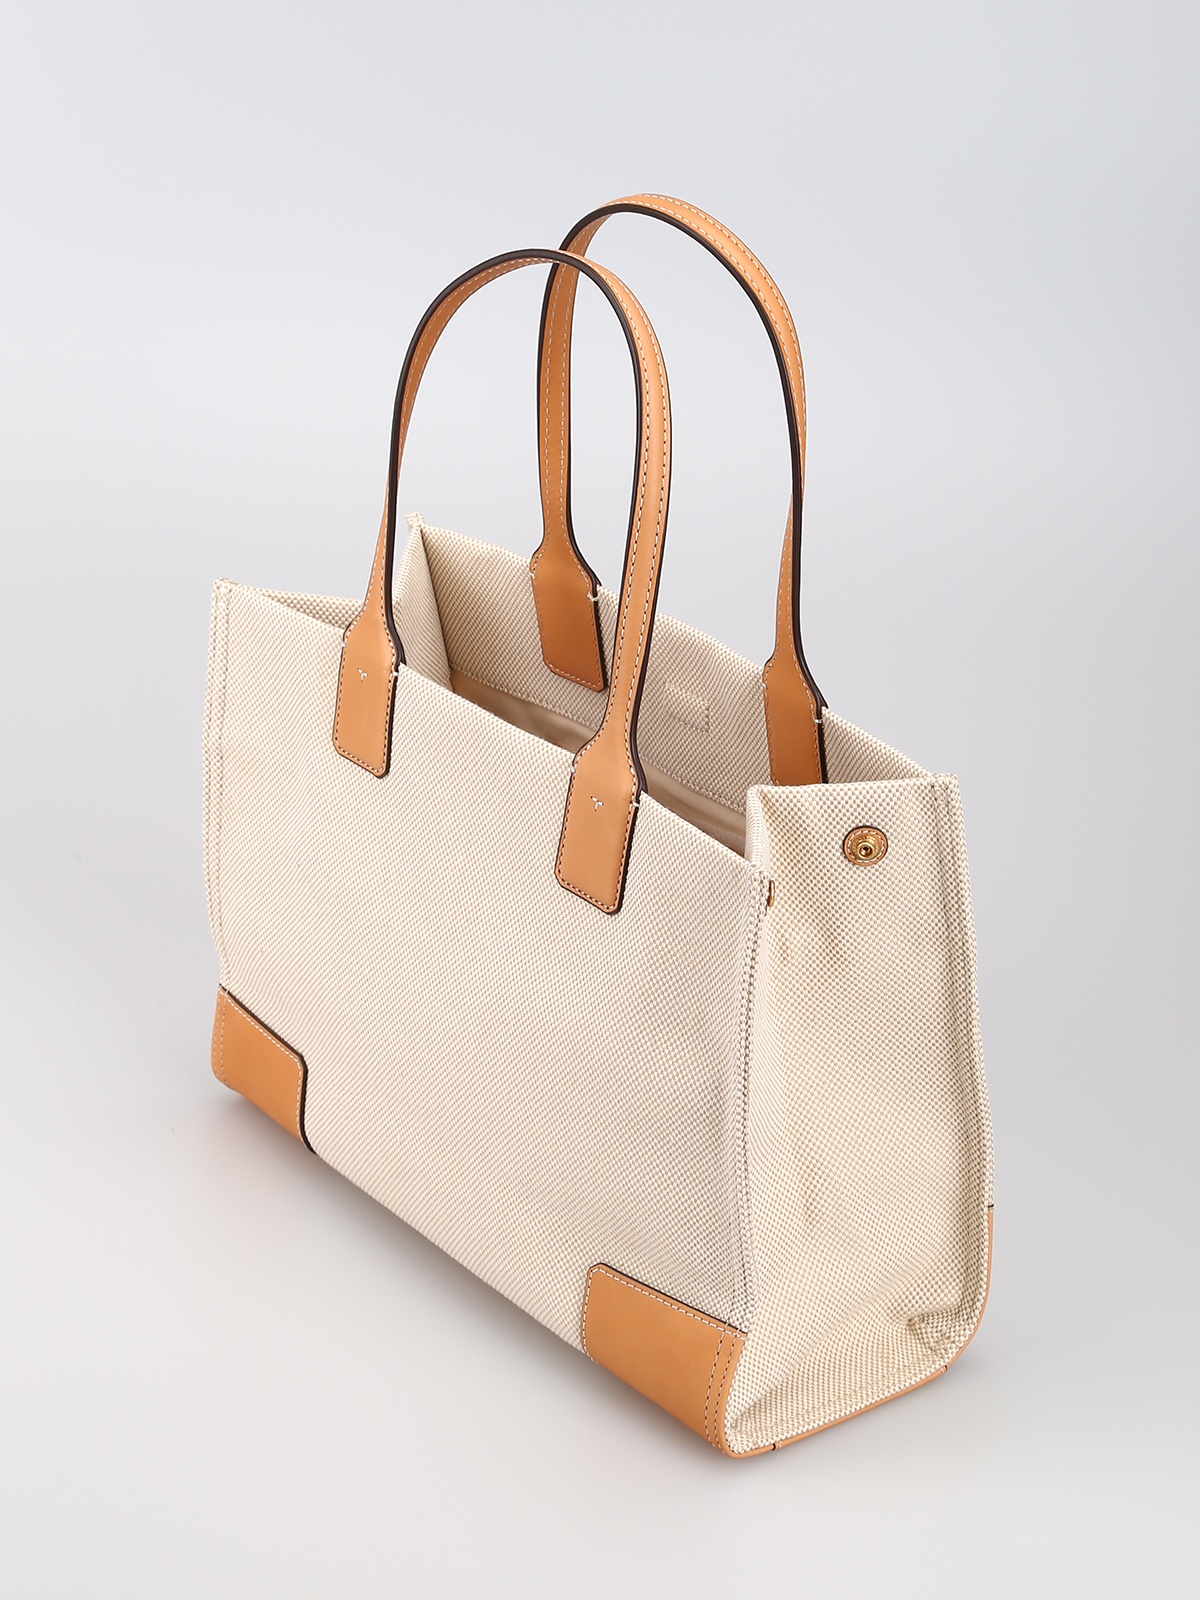 Tory Burch Beige/Off White Canvas and Leather Ella Tote Tory Burch